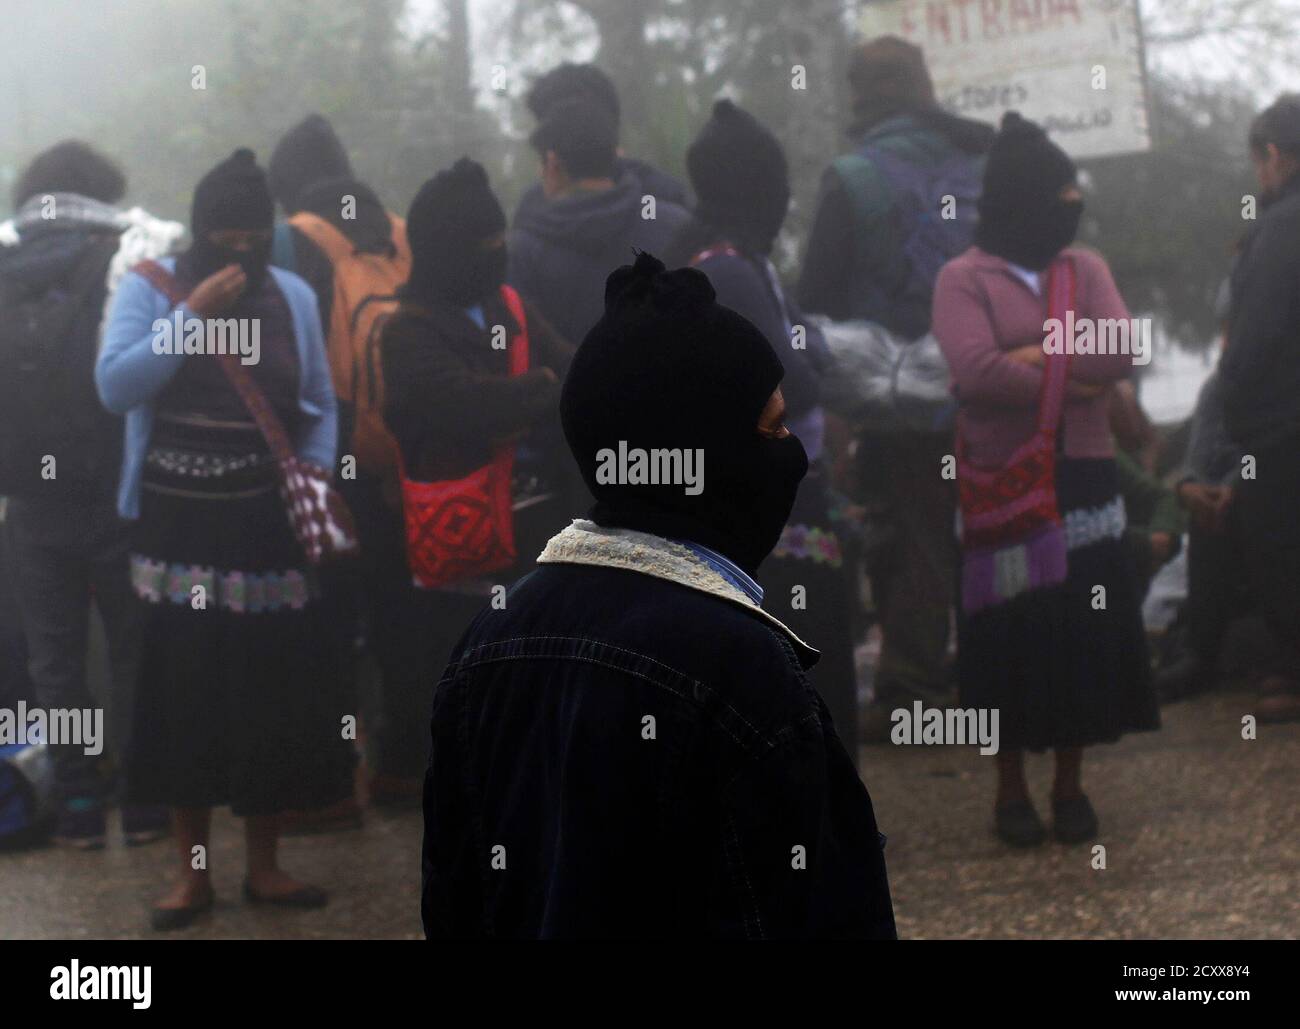 Zapatistas and followers of the Zapatista movement wait to enter the area  for 20th anniversary celebration of the armed indigenous insurgency in  Oventic December 31, 2013. Twenty years after Marcos led armed